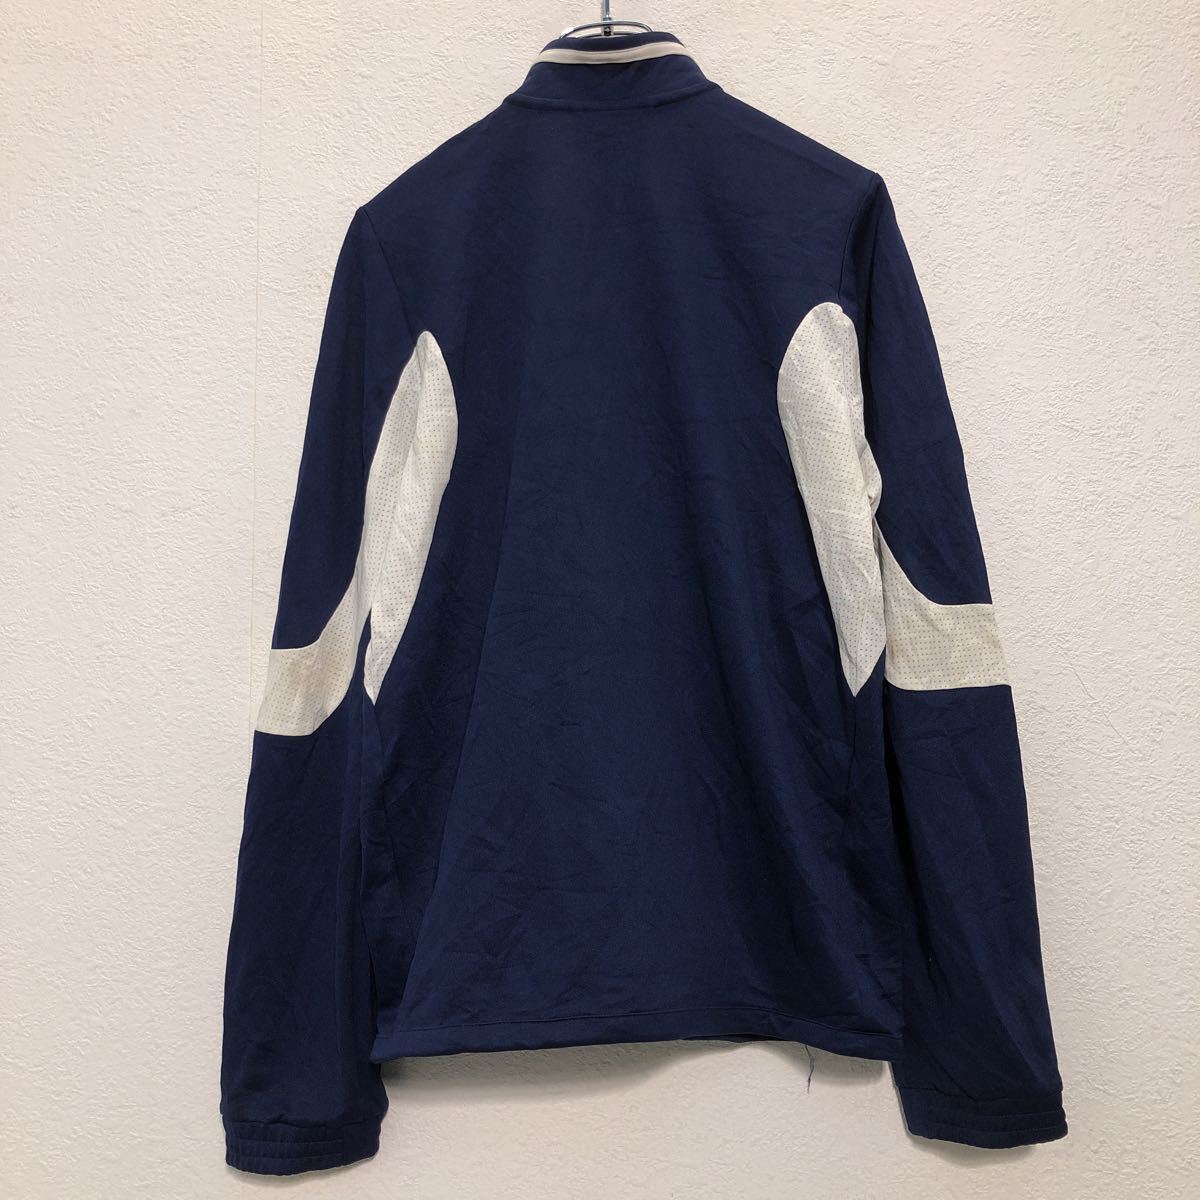 adidas jersey 160 navy white Adidas Kids mesh Zip up pocket sport old clothes . America buying up a505-5165